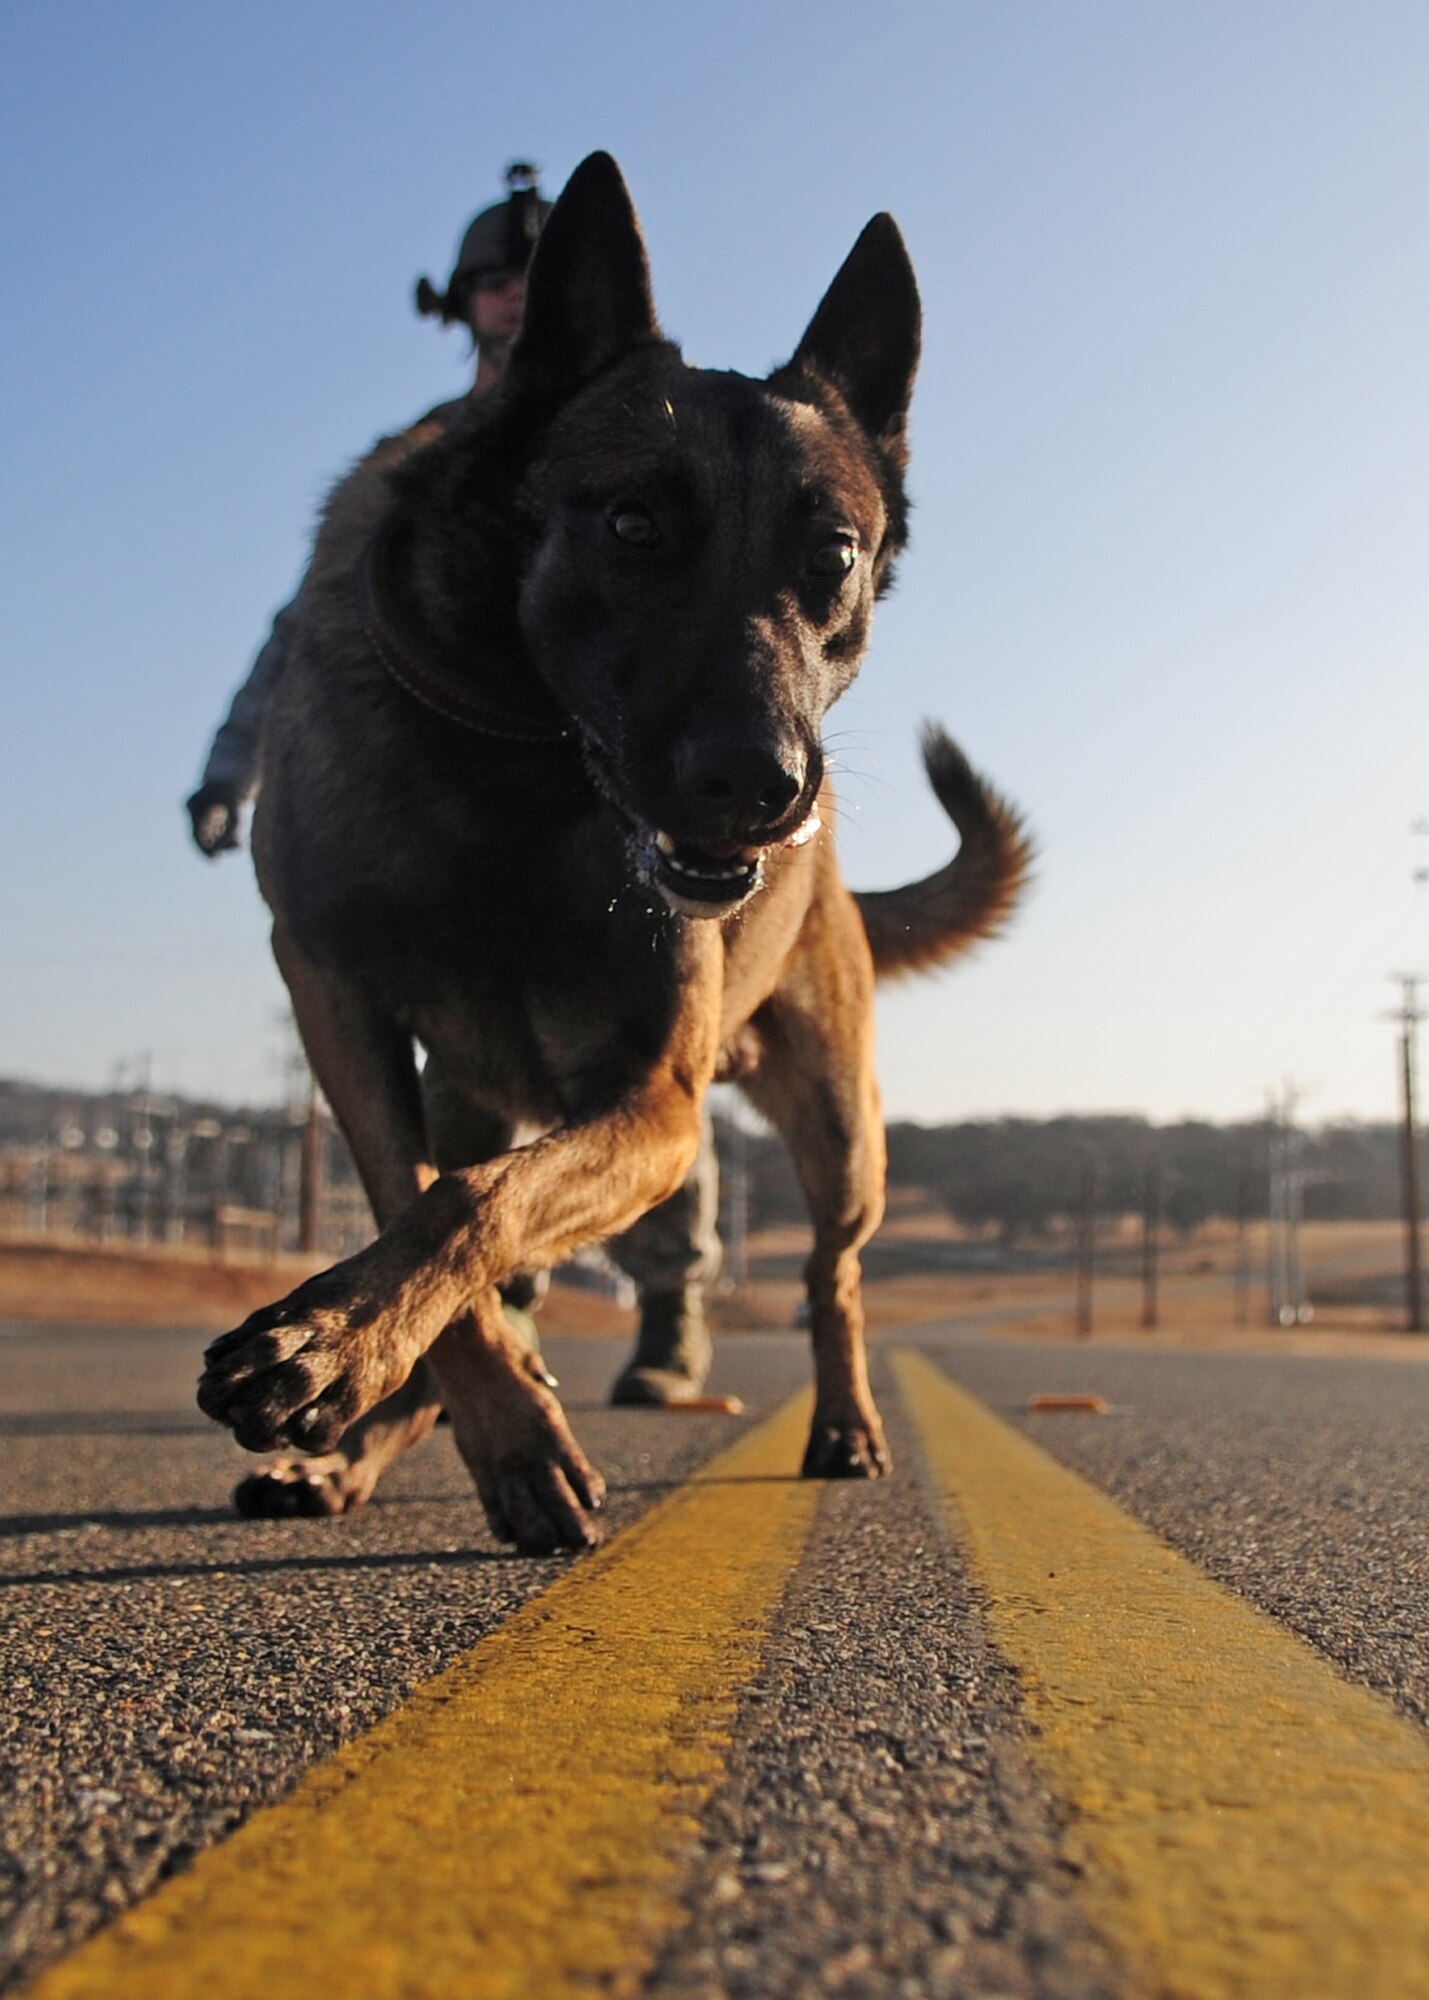 Zack, one of the 9th Security Forces Squadron’s newest military working dogs, walks the center line of an abandoned road on Beale AFB during a ruck march Jan. 9, 2012. Each member of the military working dog flight marches at least once a week while keeping up with other training requirements as well as care and maintenance of the animals and kennels. (U.S Air Force photo by Senior Airman Shawn Nickel/Released)